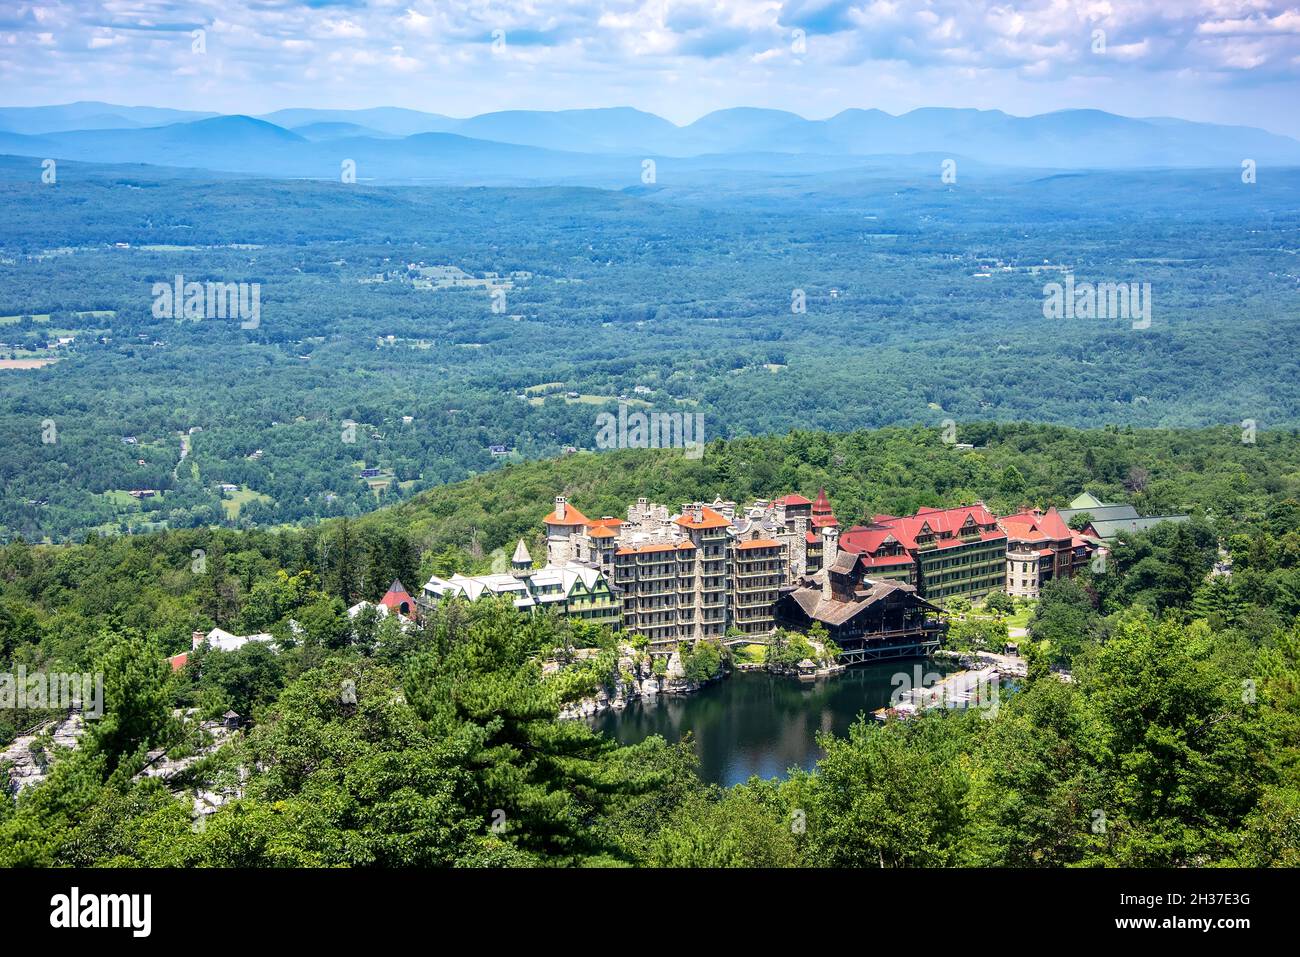 Scenic view of Mohonk Mountain House from Sky top, in upstate New York Stock Photo